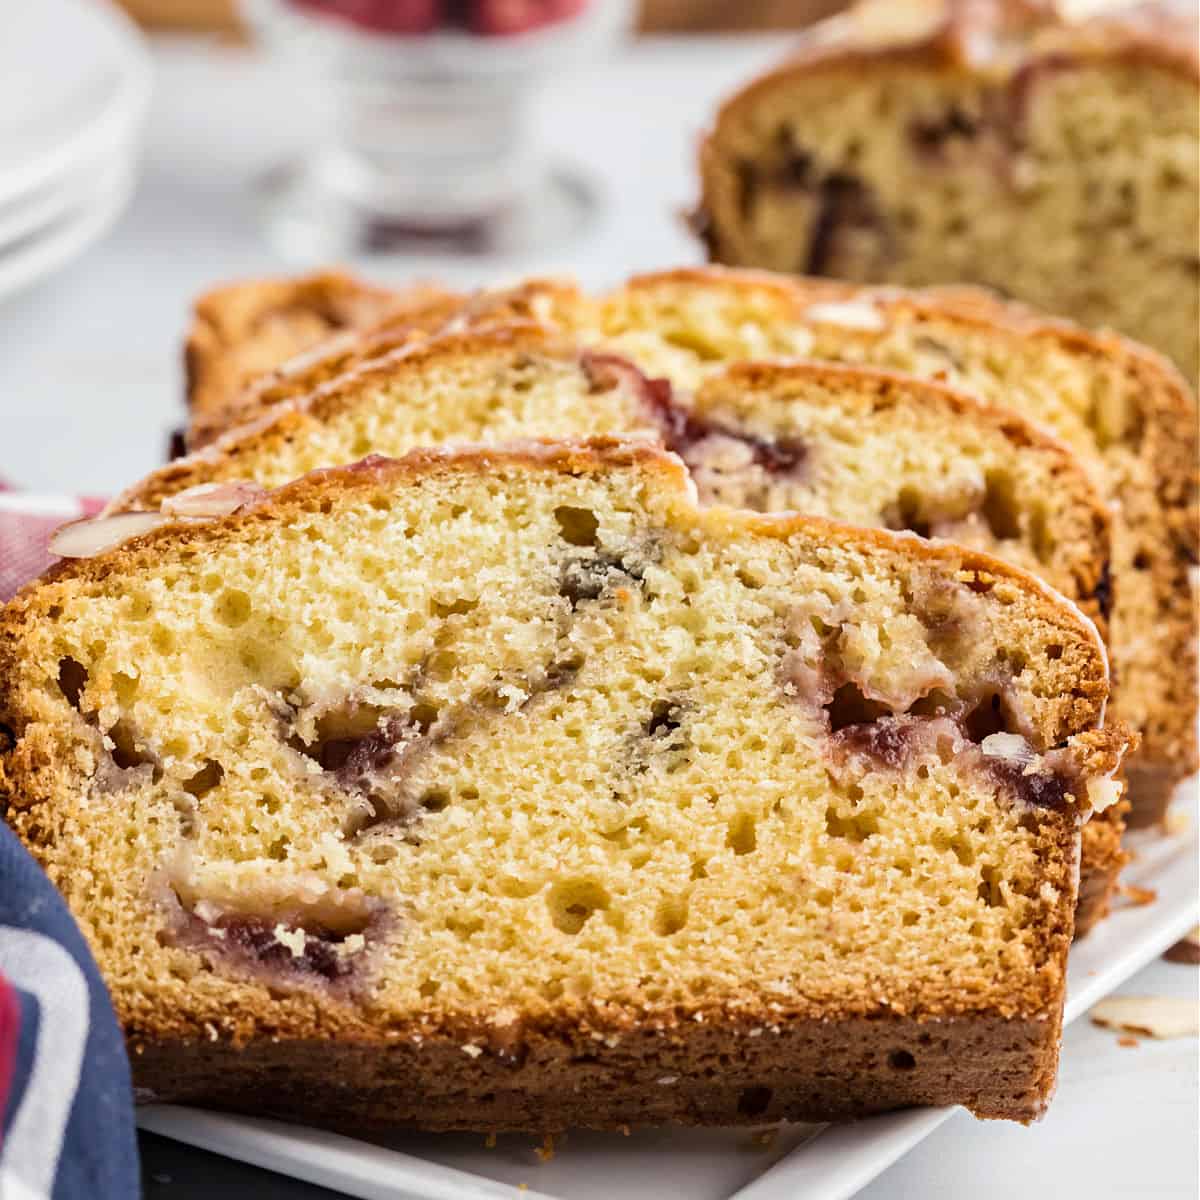 If you love homemade quick bread, this Cranberry Almond Bread recipe is a must try. Moist, delicious, and swirls of cranberries throughout. Bake up two freezer friendly loaves--one for now and one to enjoy later!